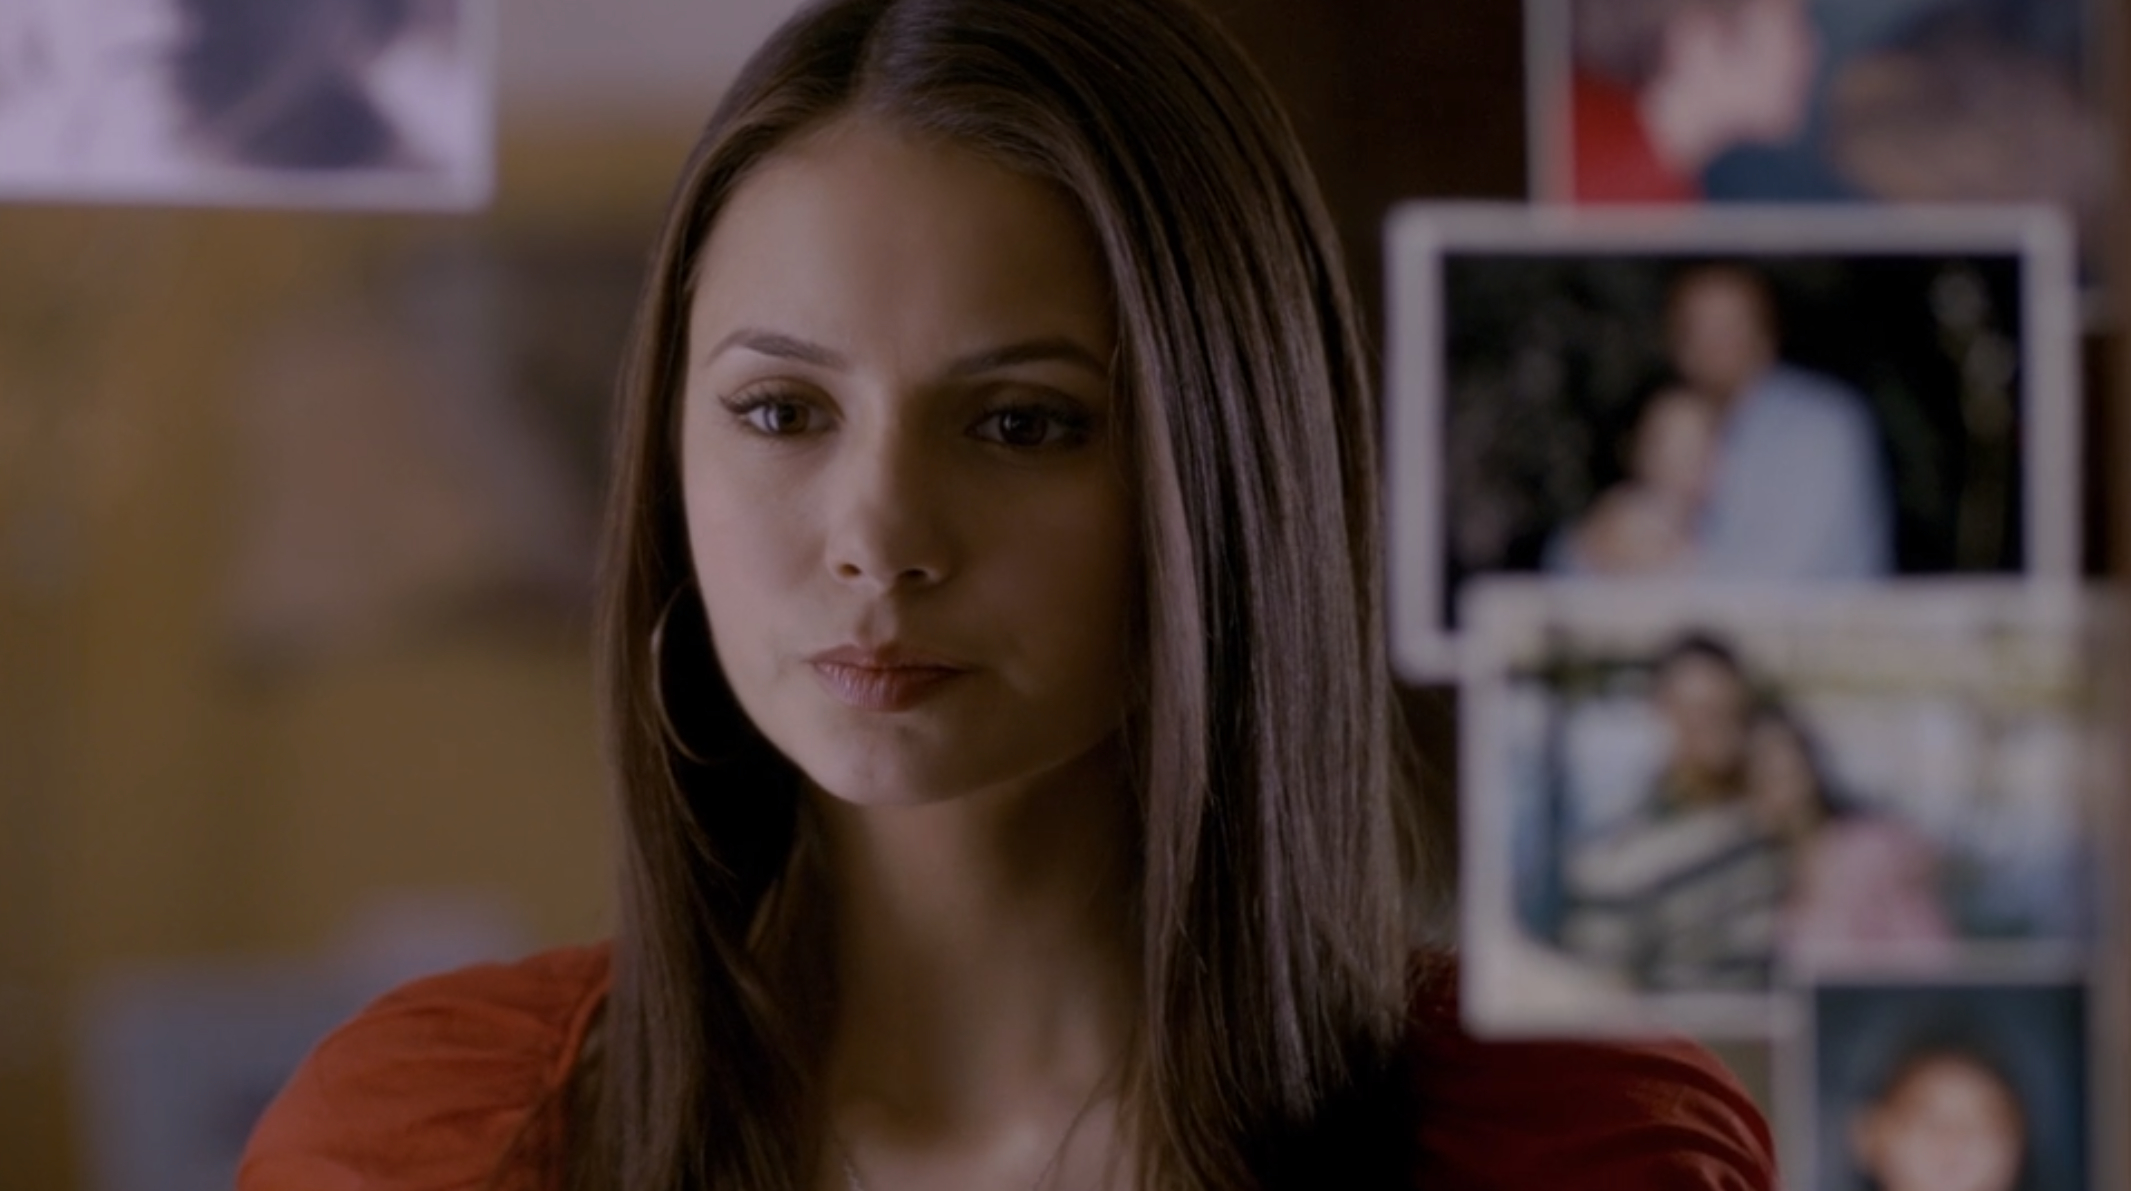 elena in the series premiere of the vampire diaries